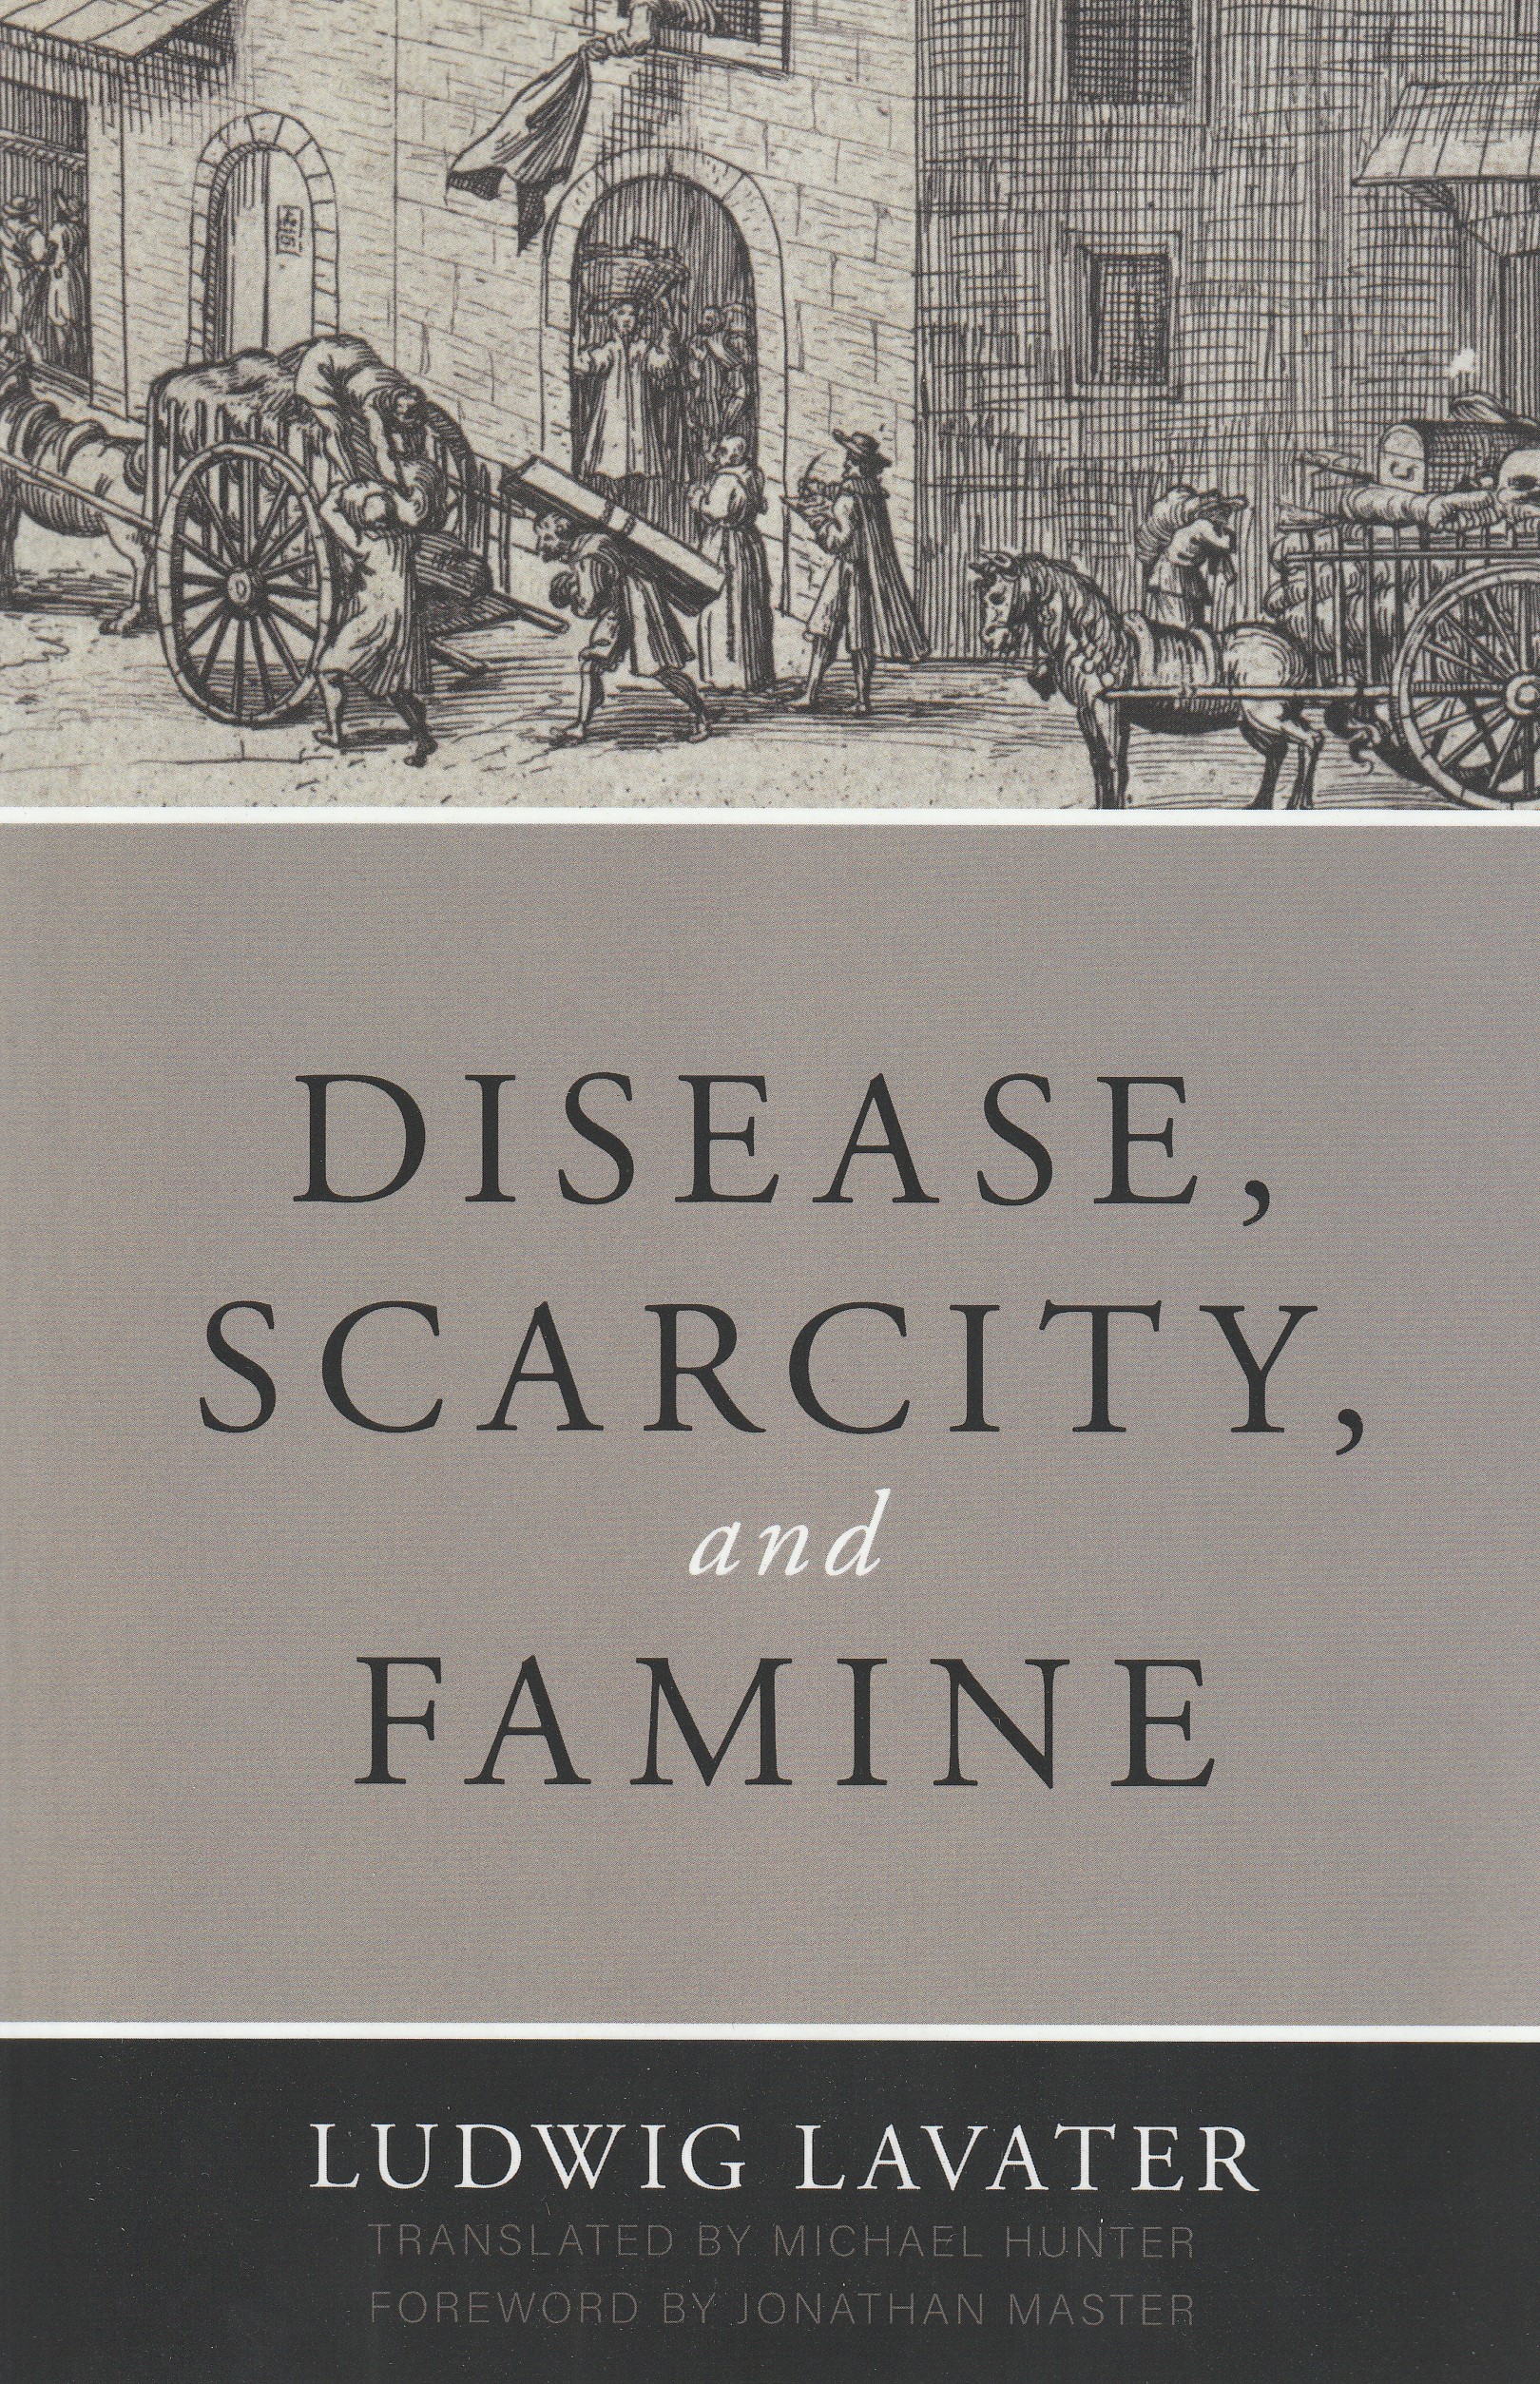 Disease, Scarcity, and Famine